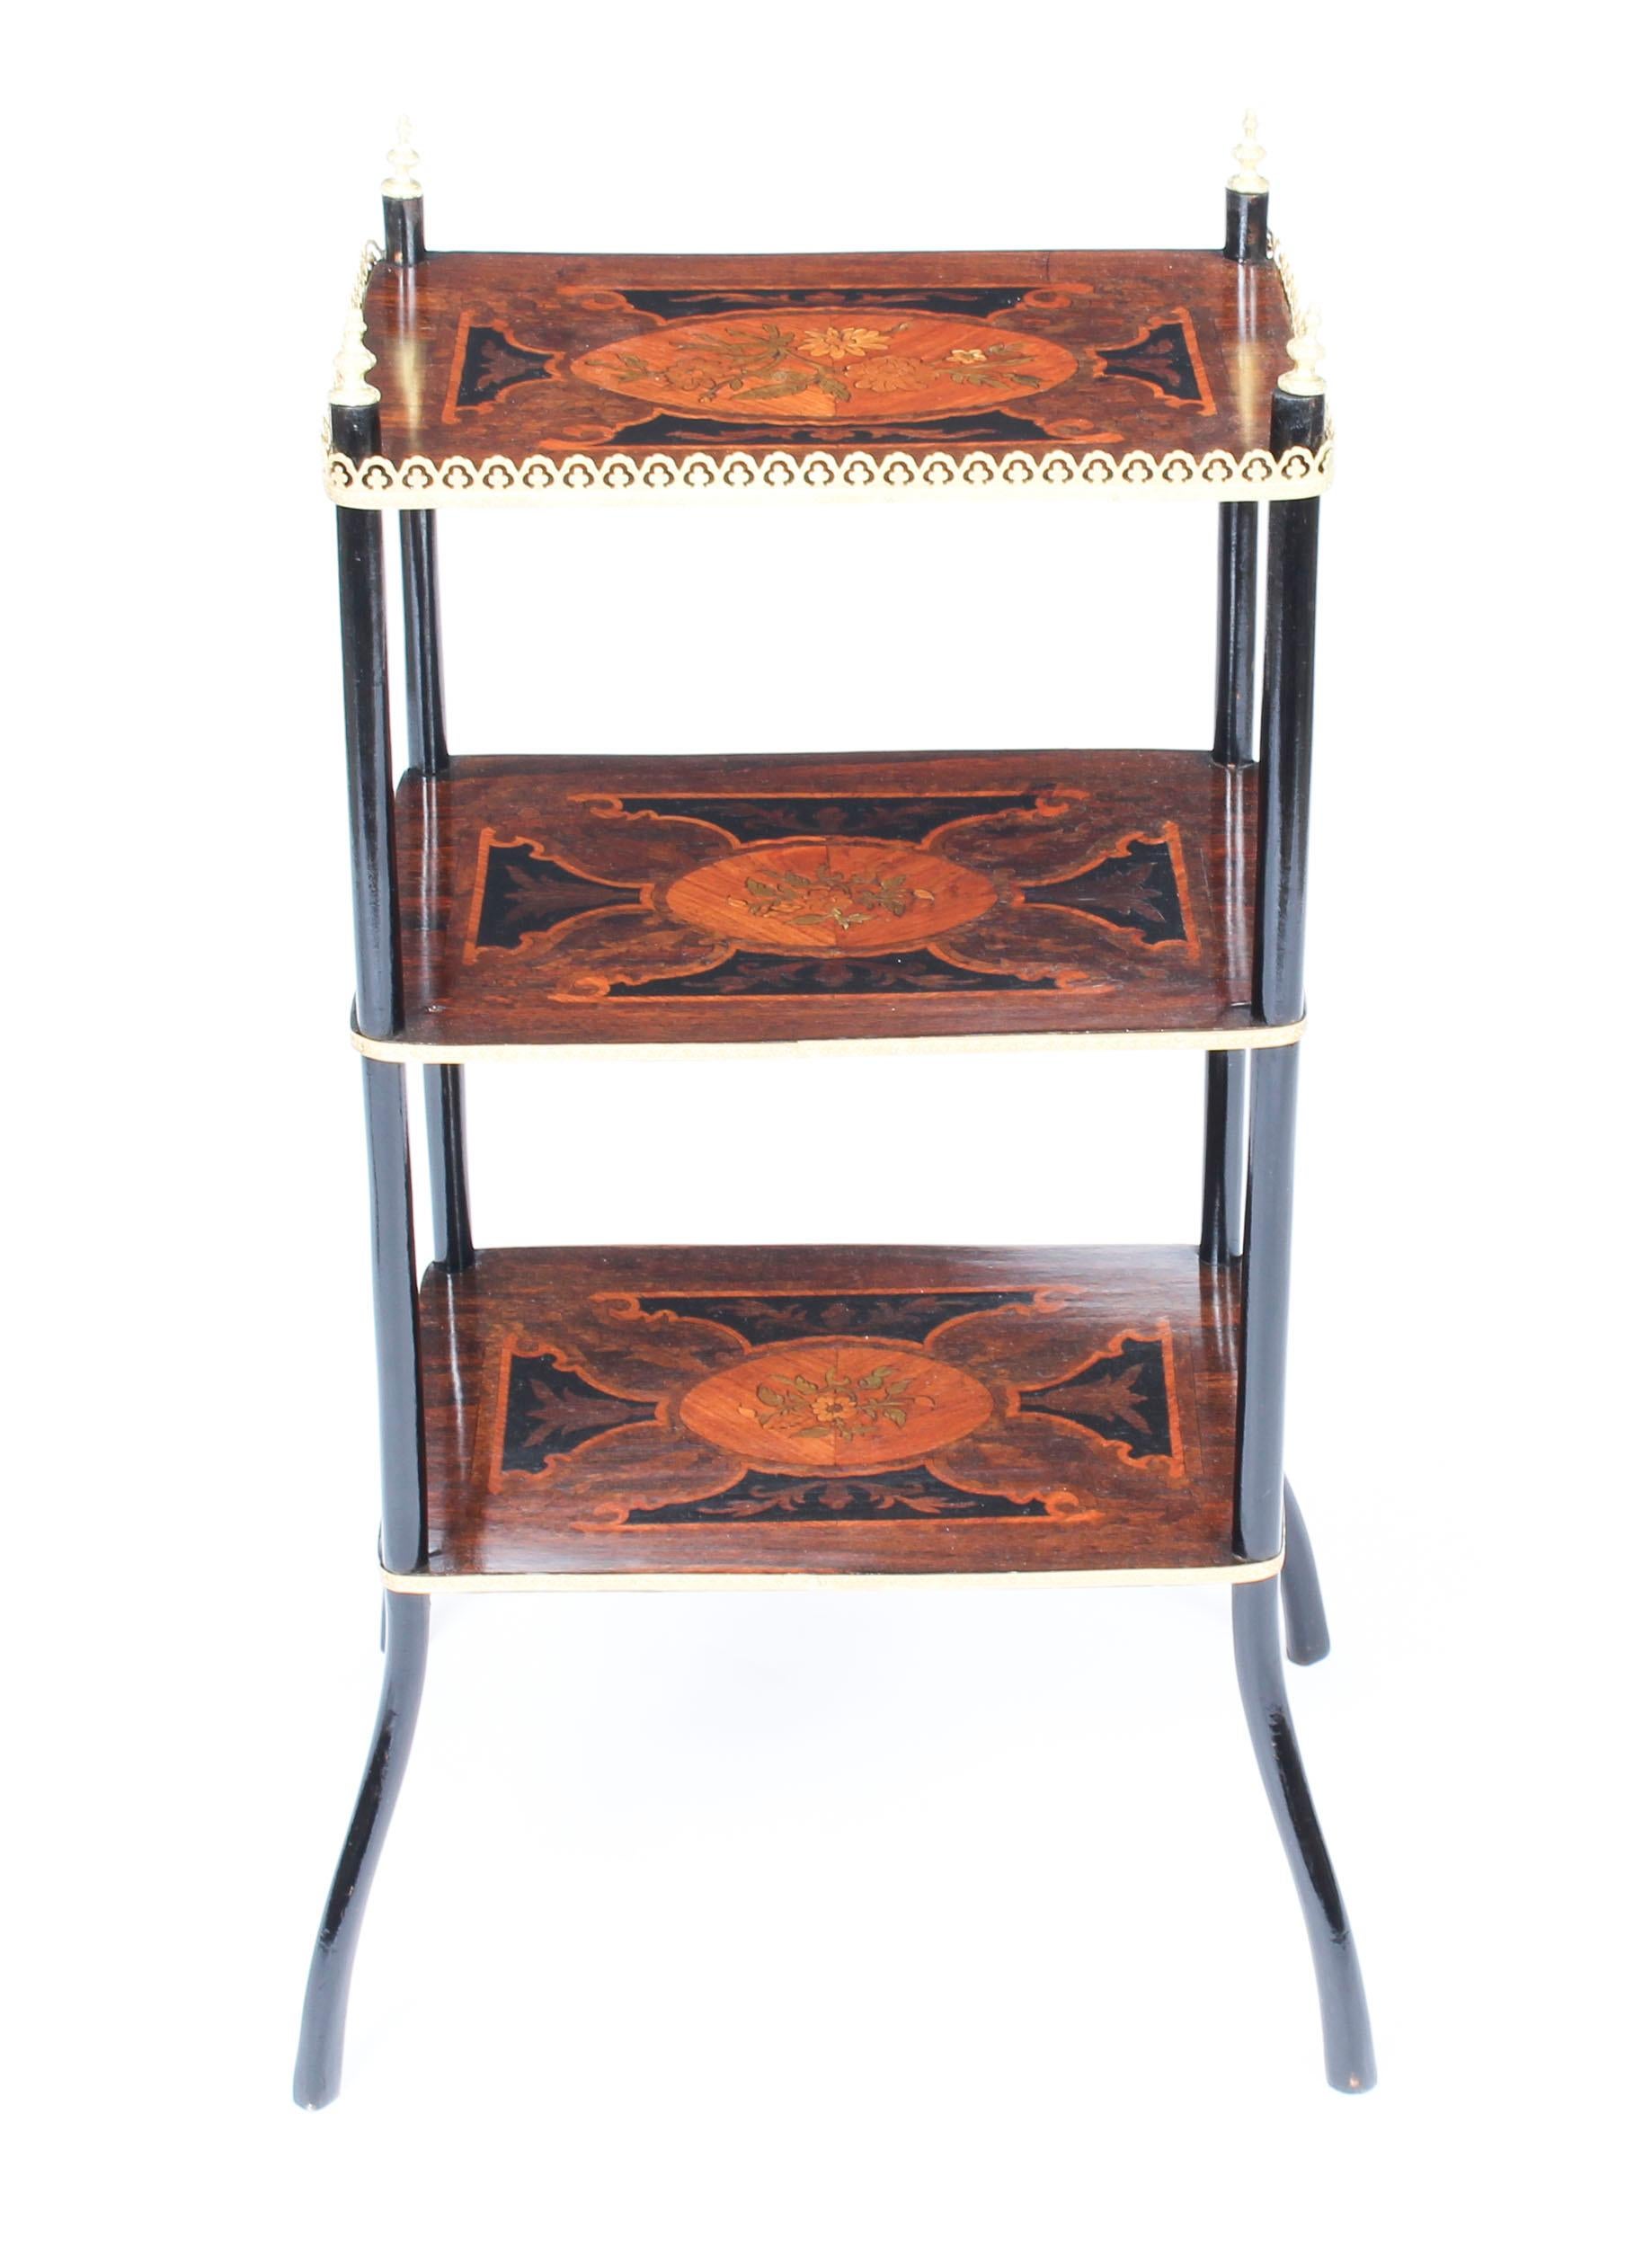 This is a truly delightful antique French marquetry and ebonized three-tier étagère or occasional table in Louis XV style, circa 1860 in date.

This elegant table features exquisite ormolu mounts and stands on shaped ebonized legs. Each tier is